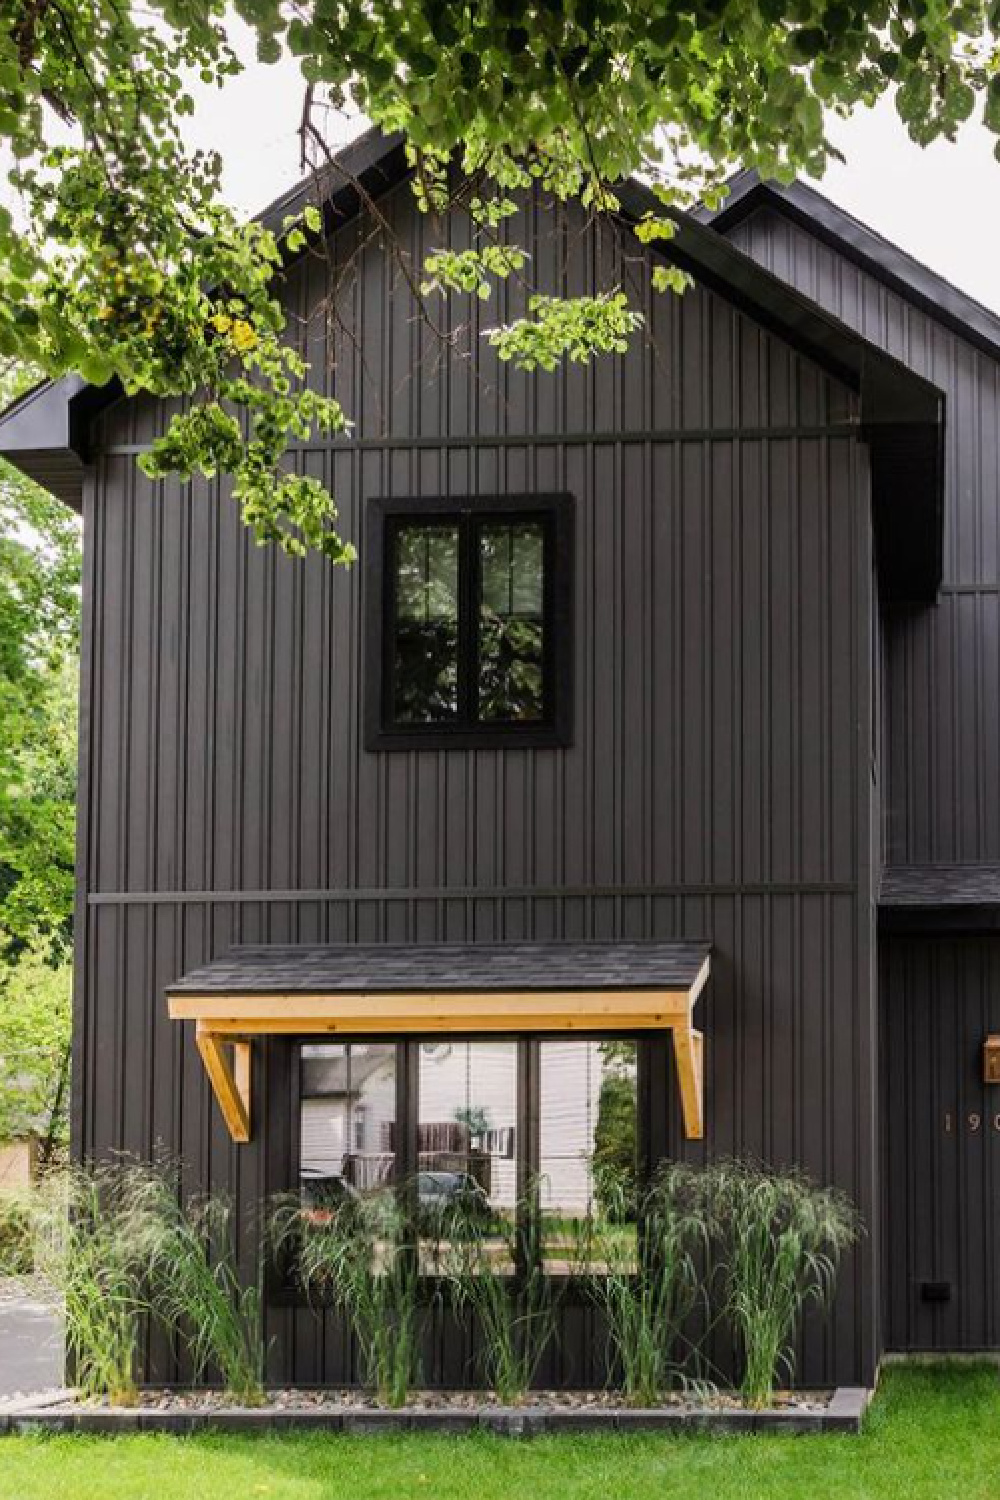 Black painted modern farmhouse exterior - @at_home_with_the_hollands #blackhouseexteriors #blackhouses